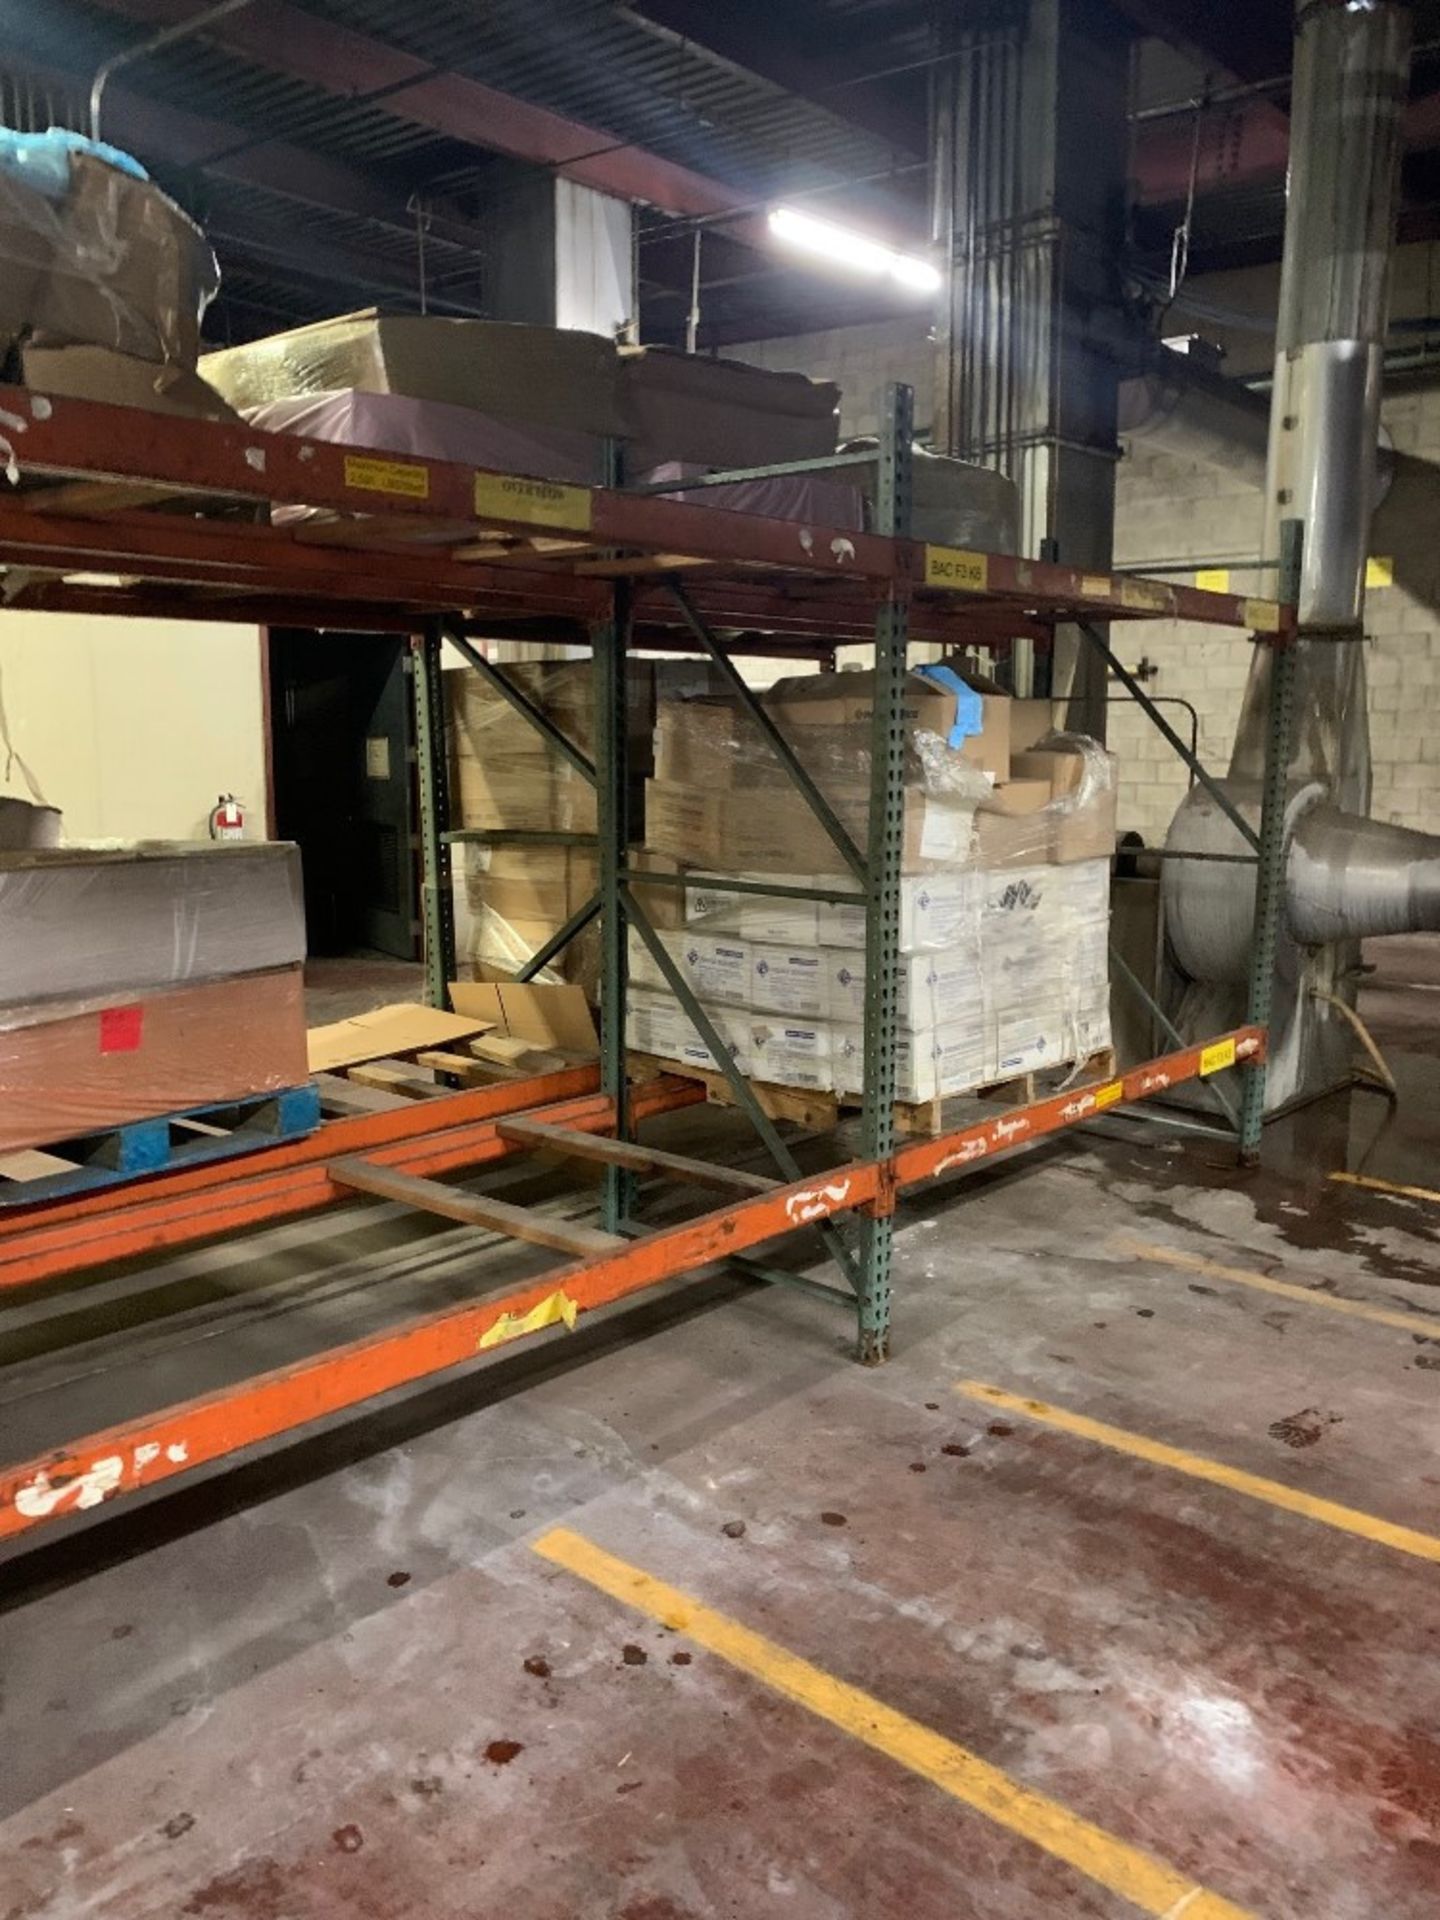 Lot (15) Sections Pallet Racking does not include contents: Required Loading Fee $400.00, Rigger- - Image 2 of 3